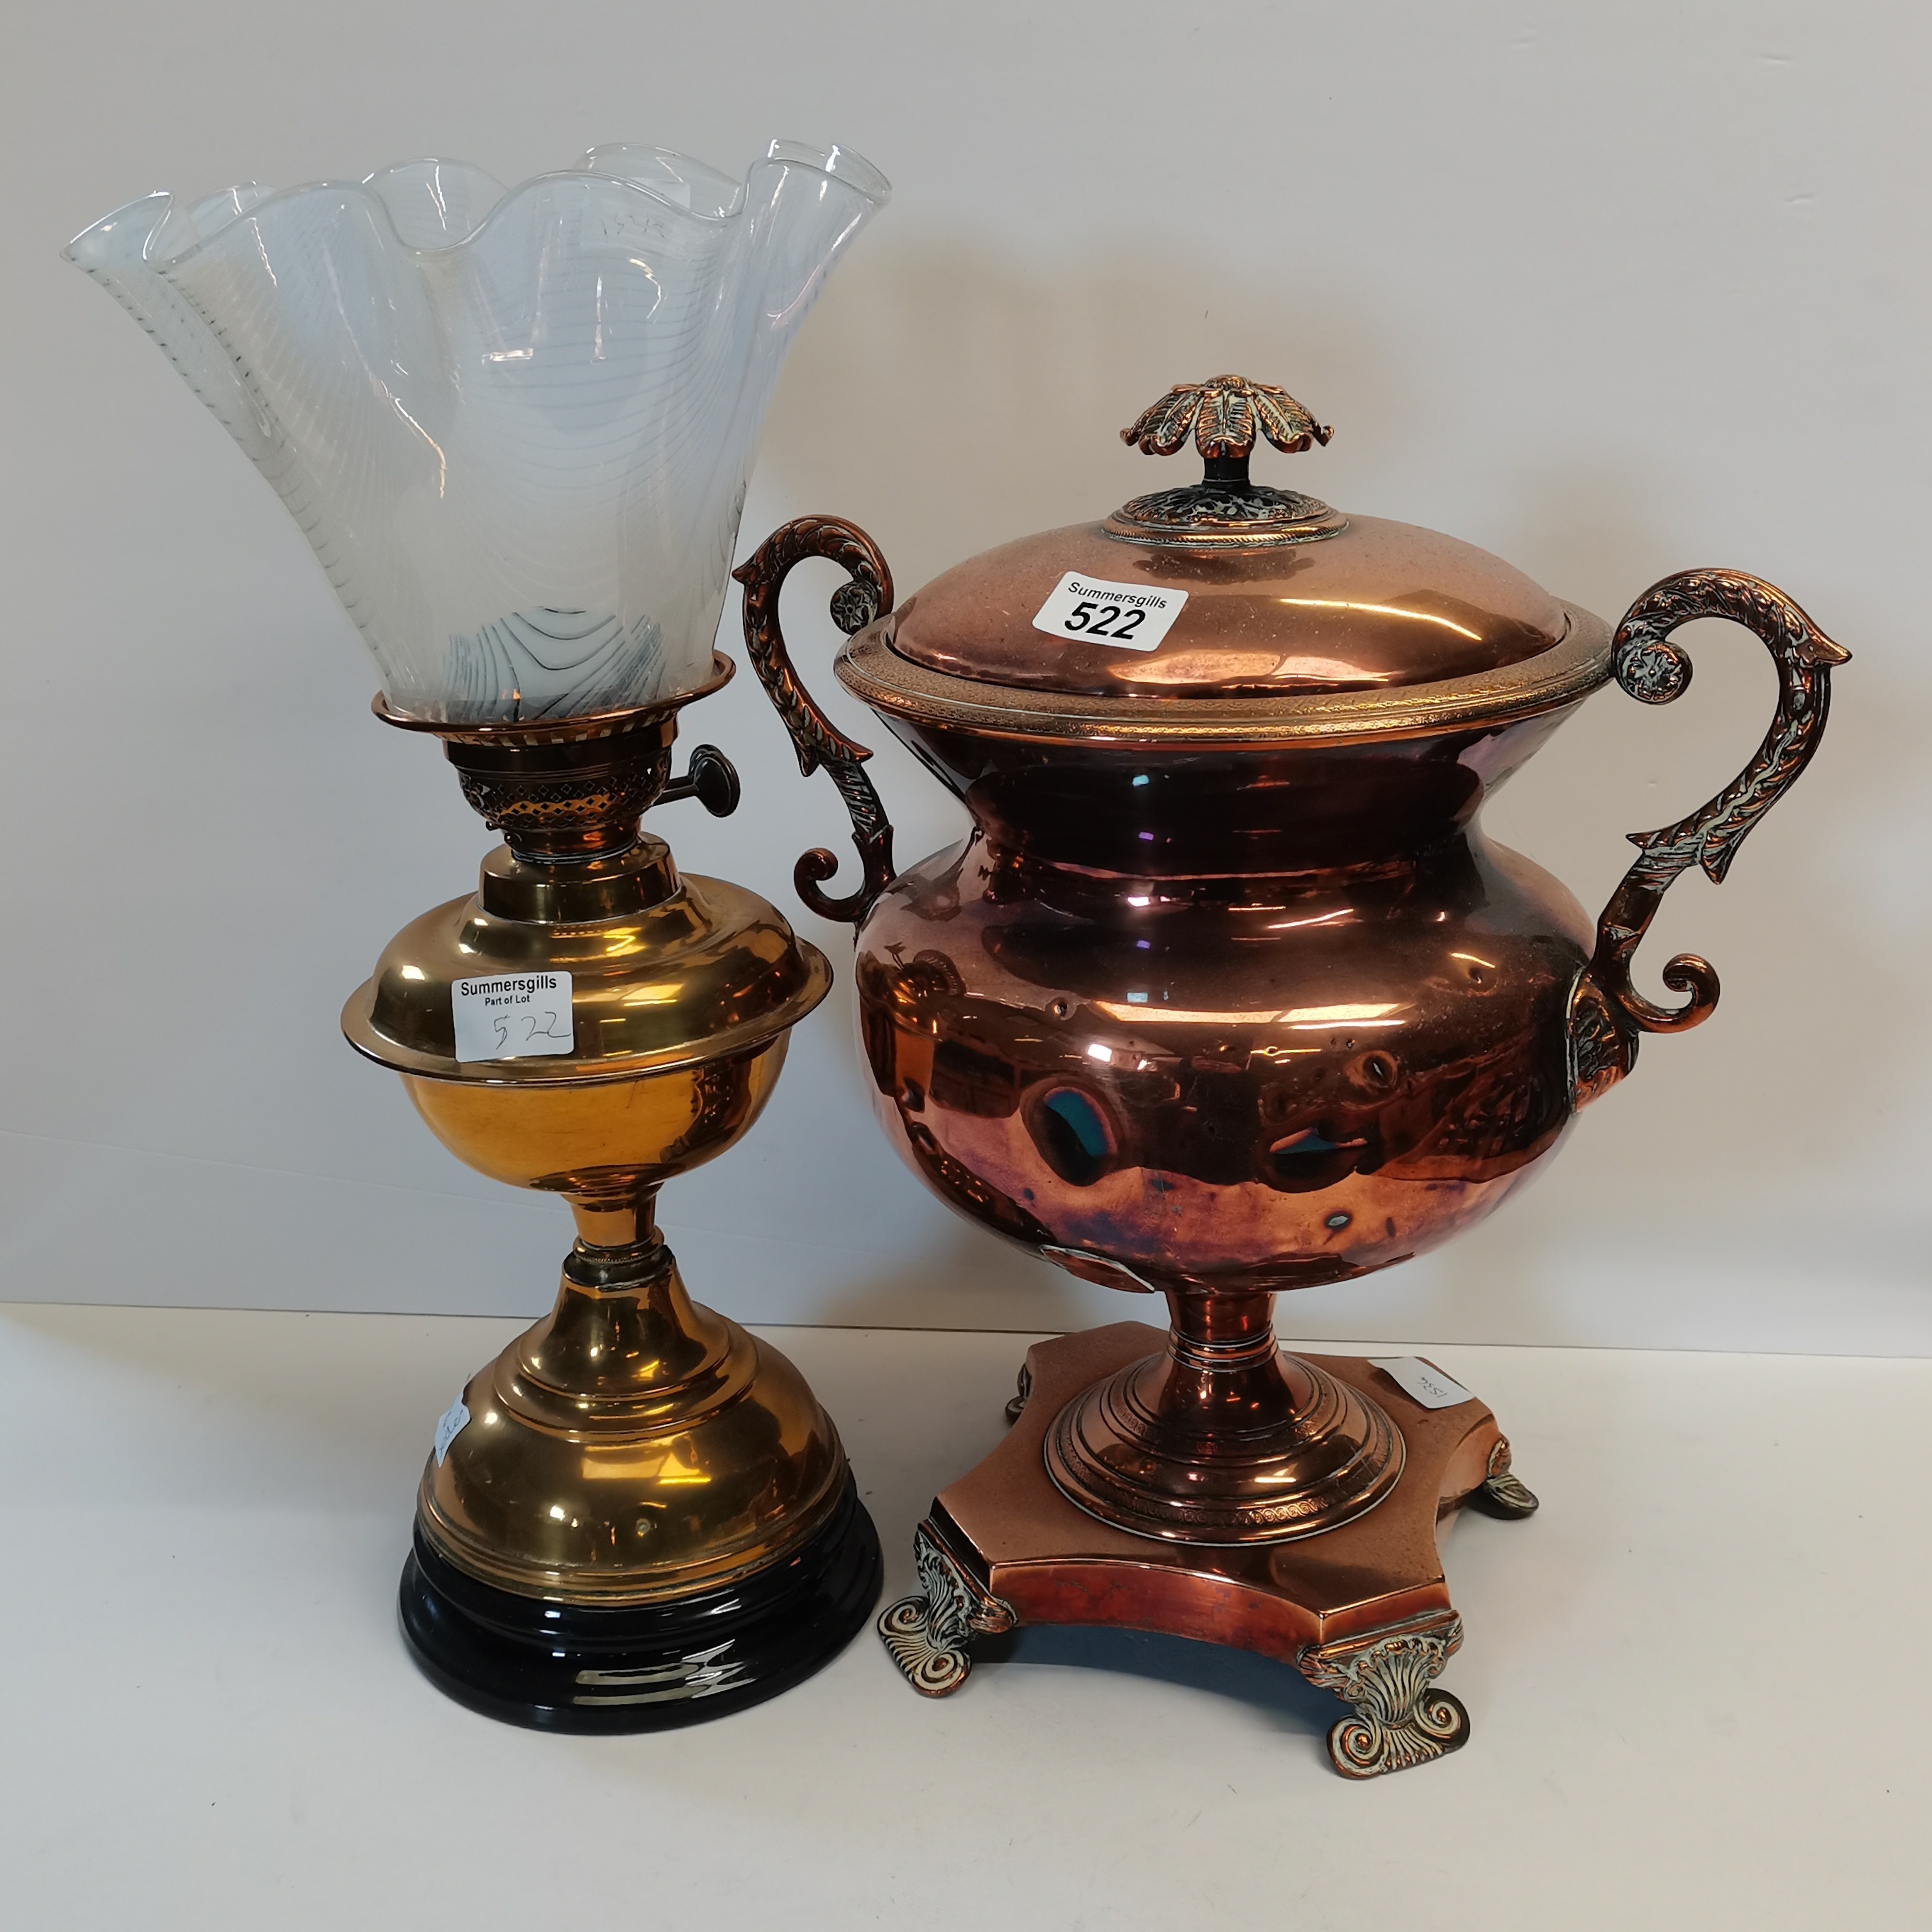 Copper tea urn and oil lantern with glass shade - Image 2 of 2